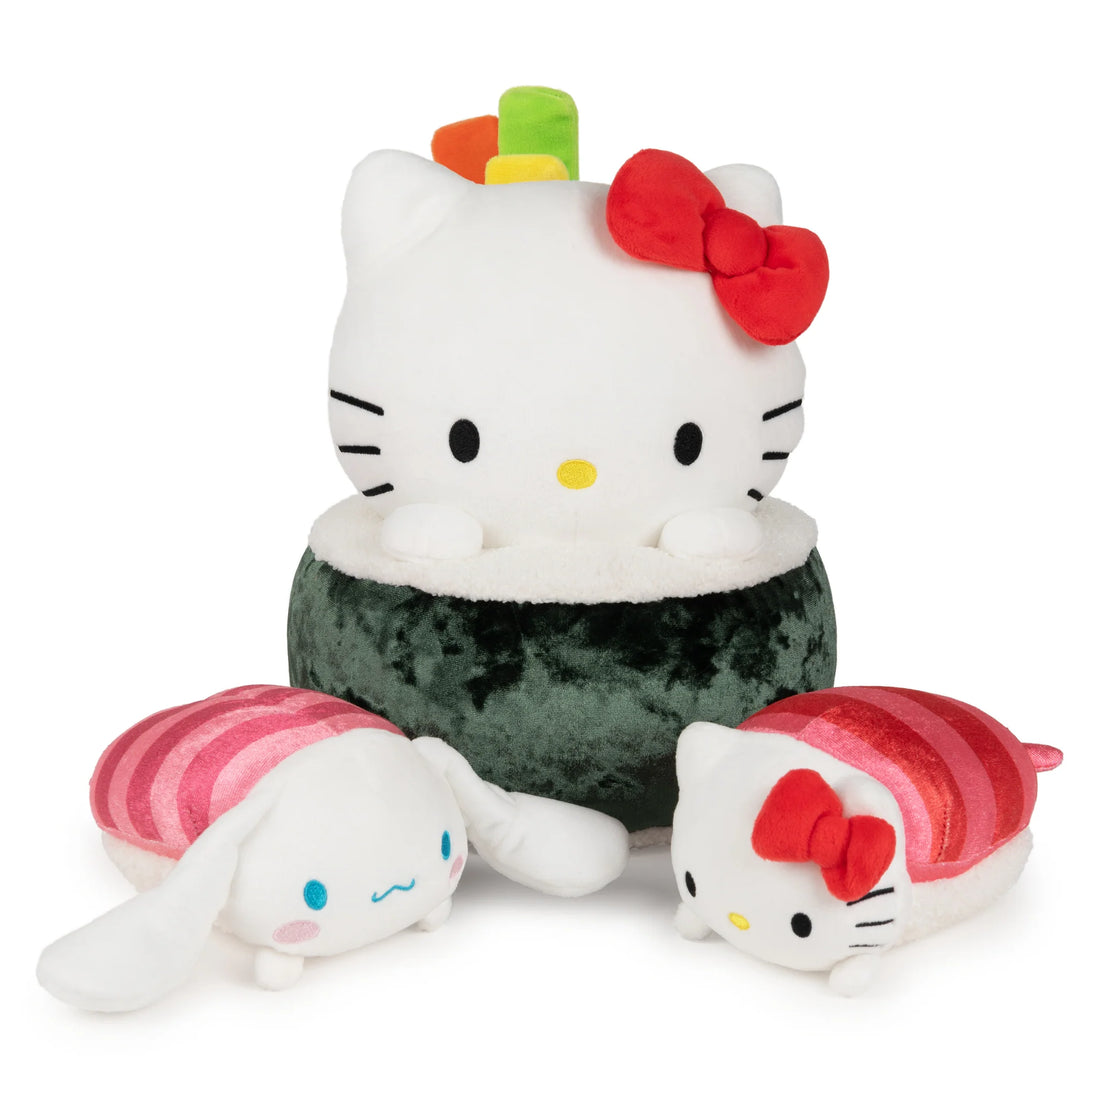 New Arrival of Gund Plush Sanrio Hello Kitty Plush at Heretoserveyou An Online Toy Store